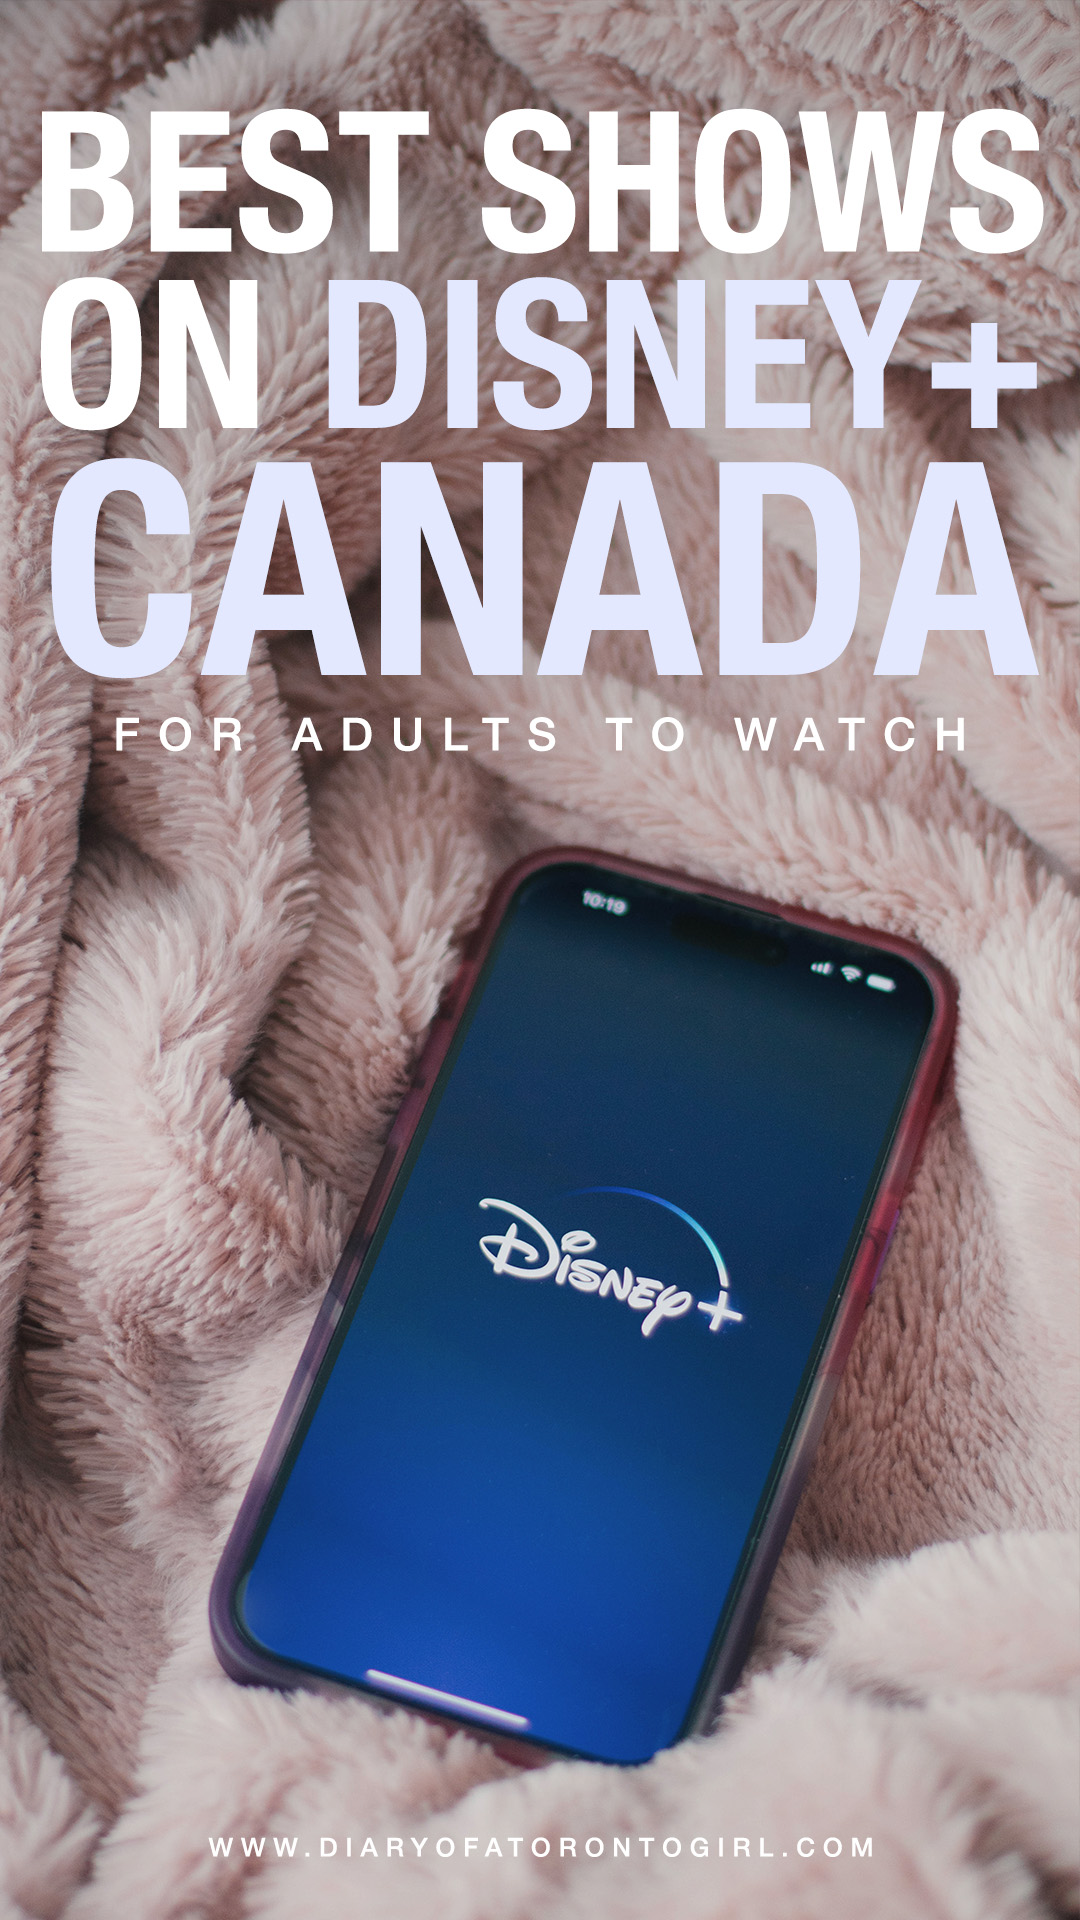 Best shows on Disney Plus Canada to watch